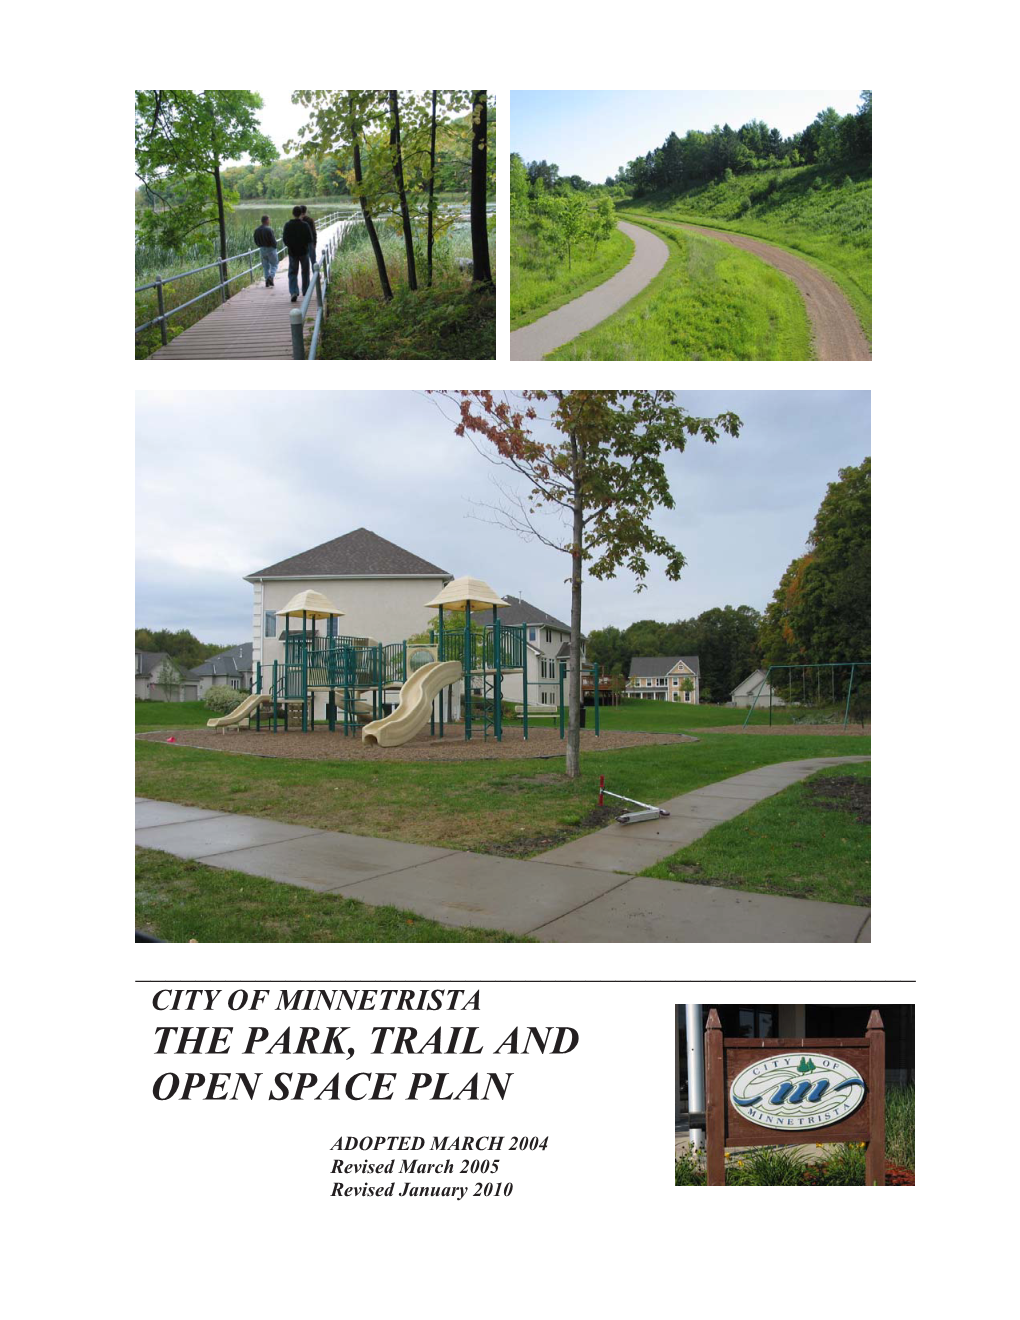 The Park, Trail and Open Space Plan